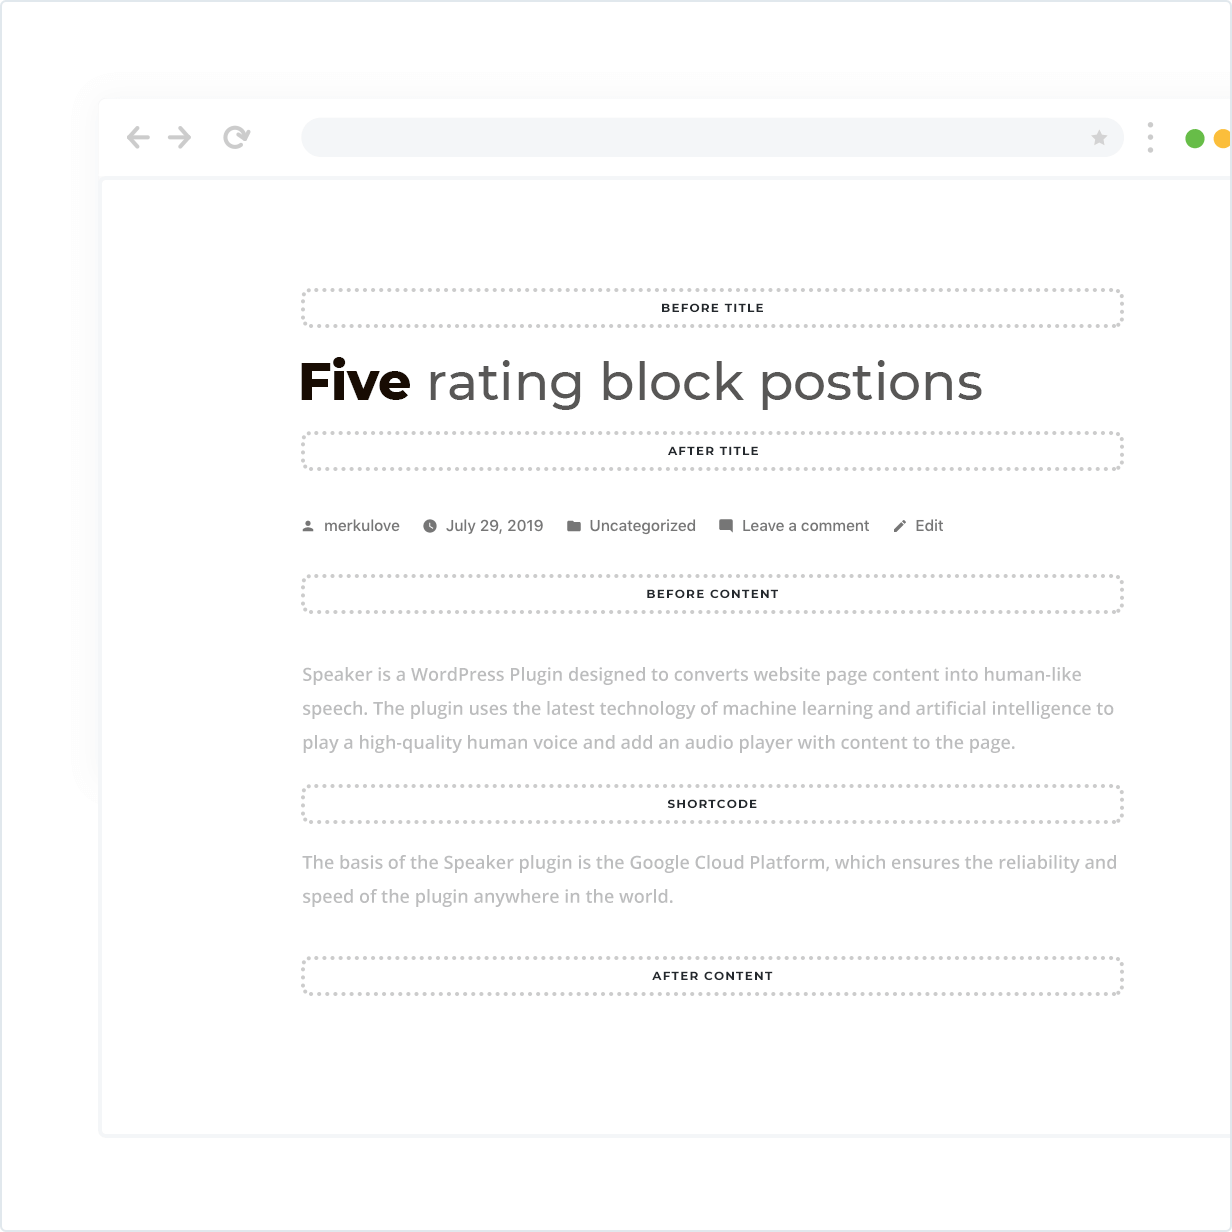 5 rating block positions